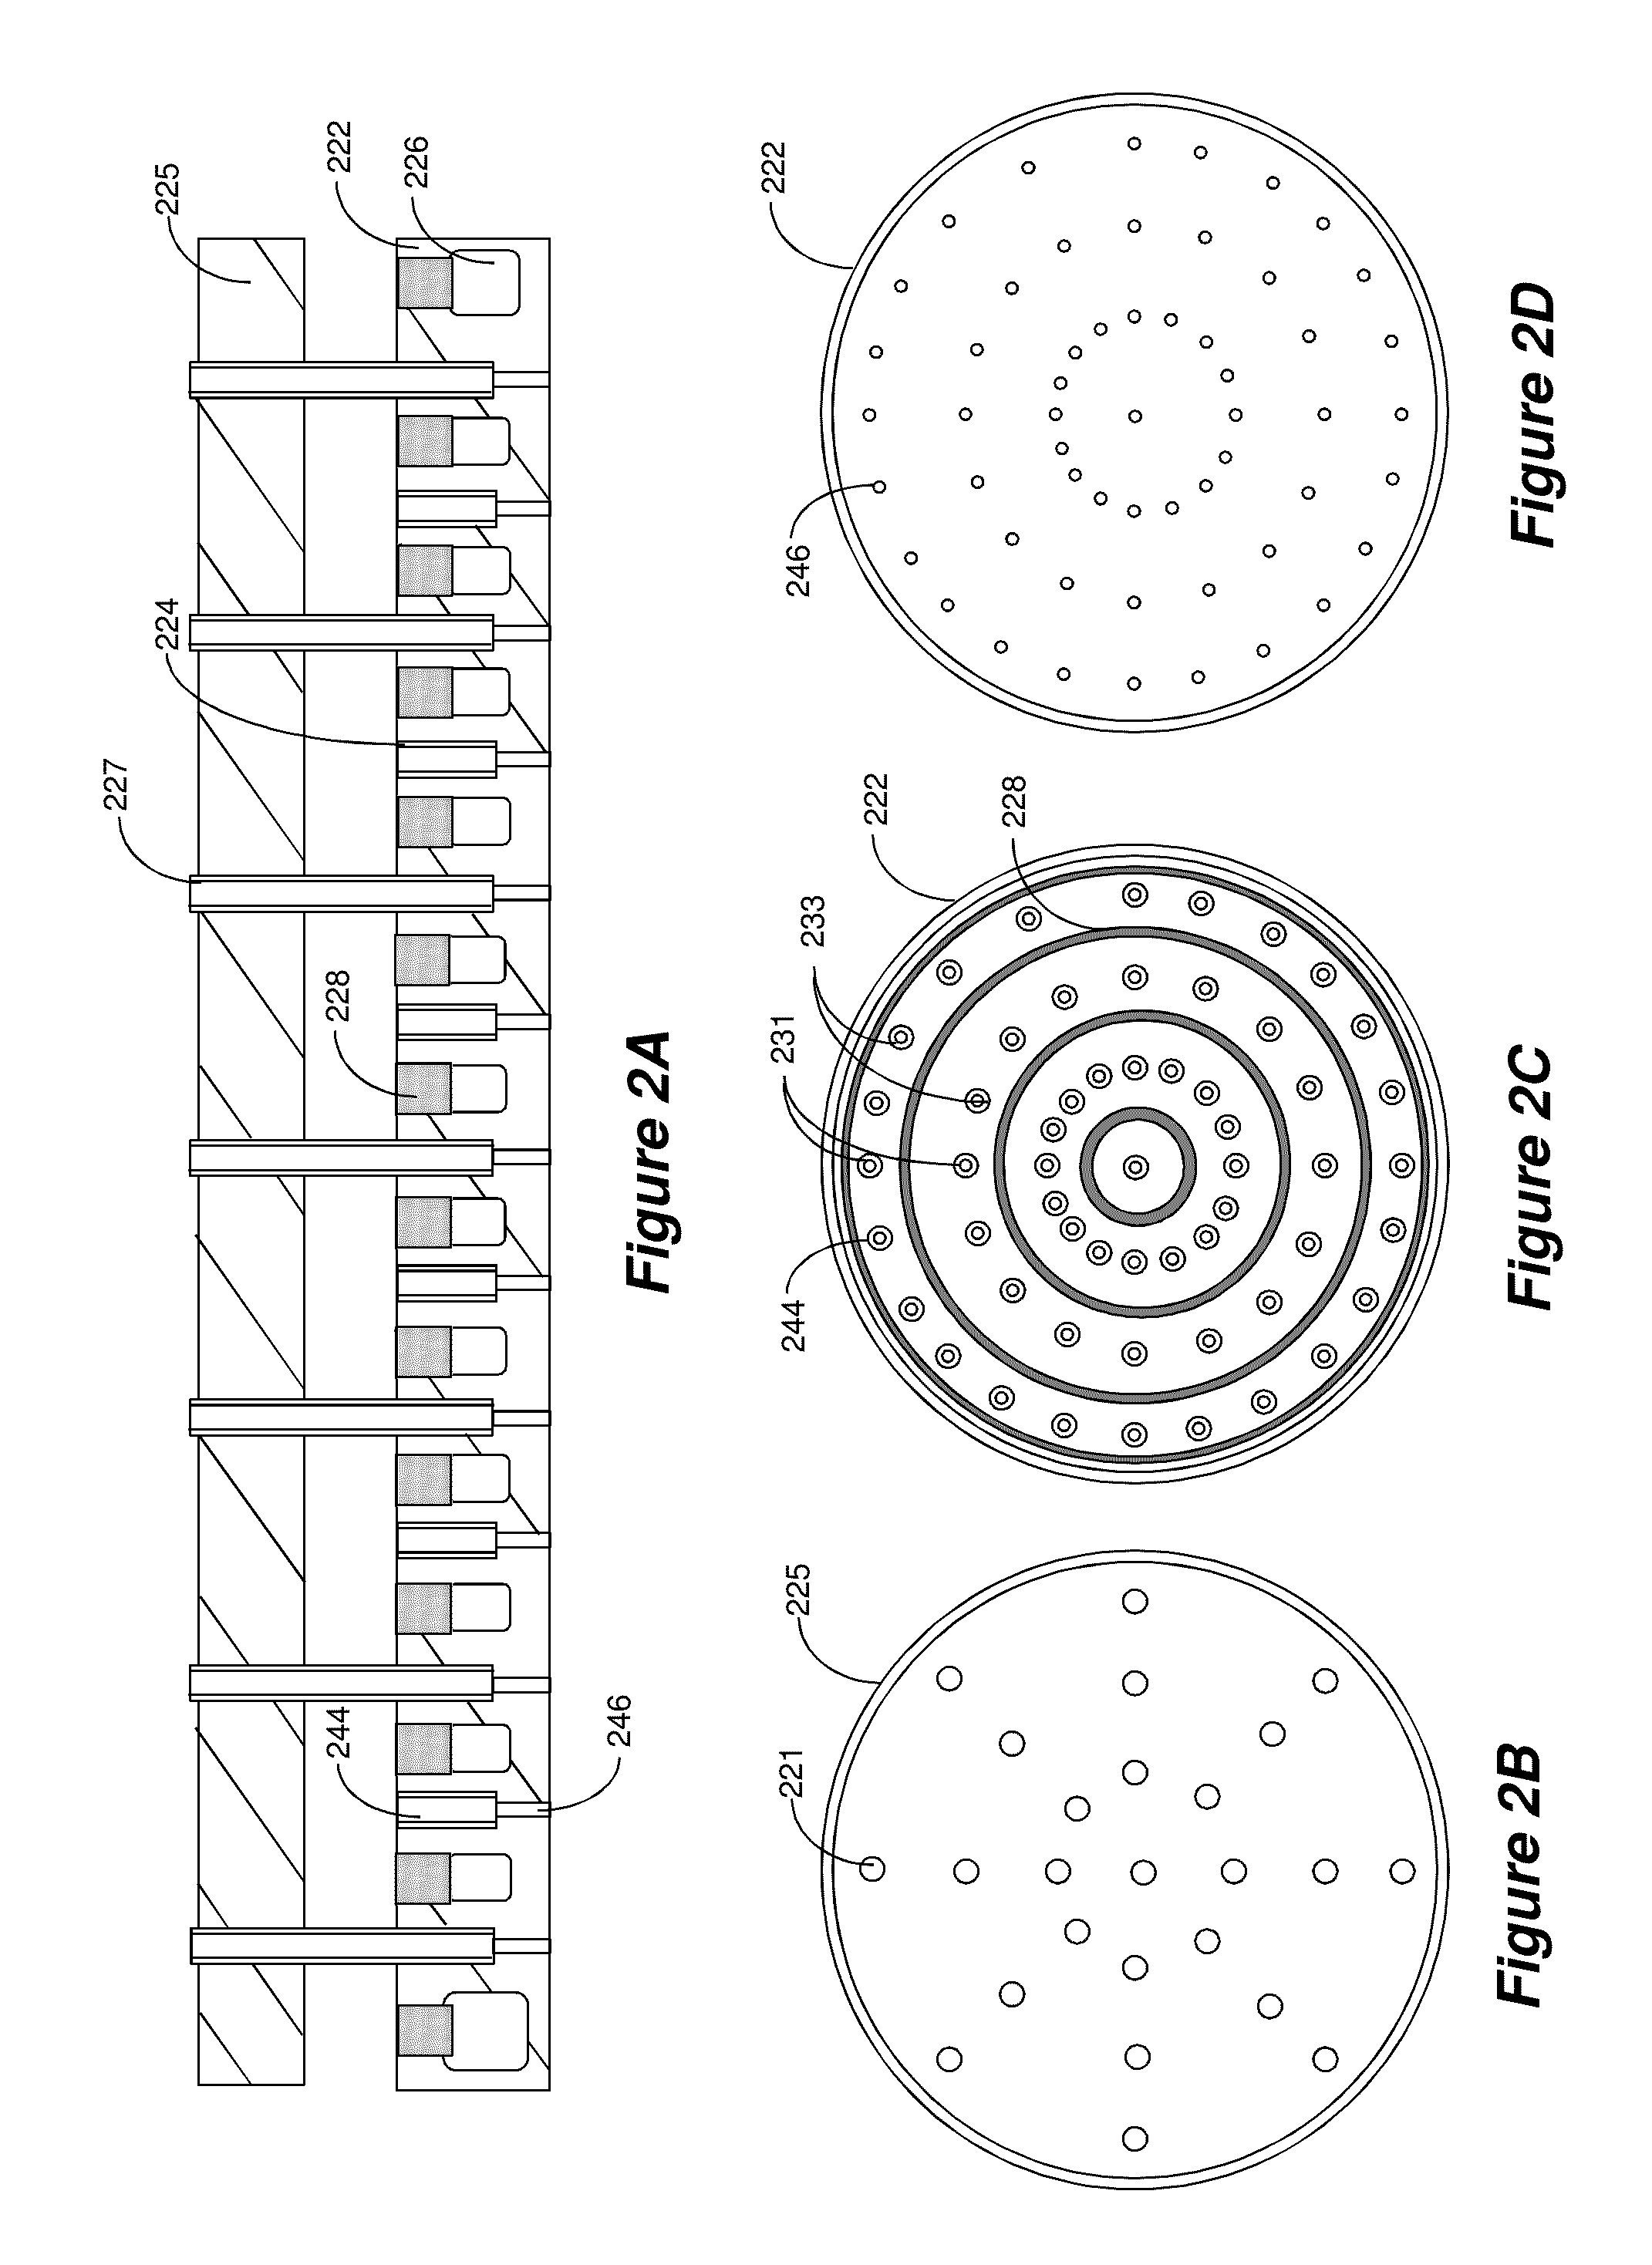 Fluid cooled showerhead with post injection mixing